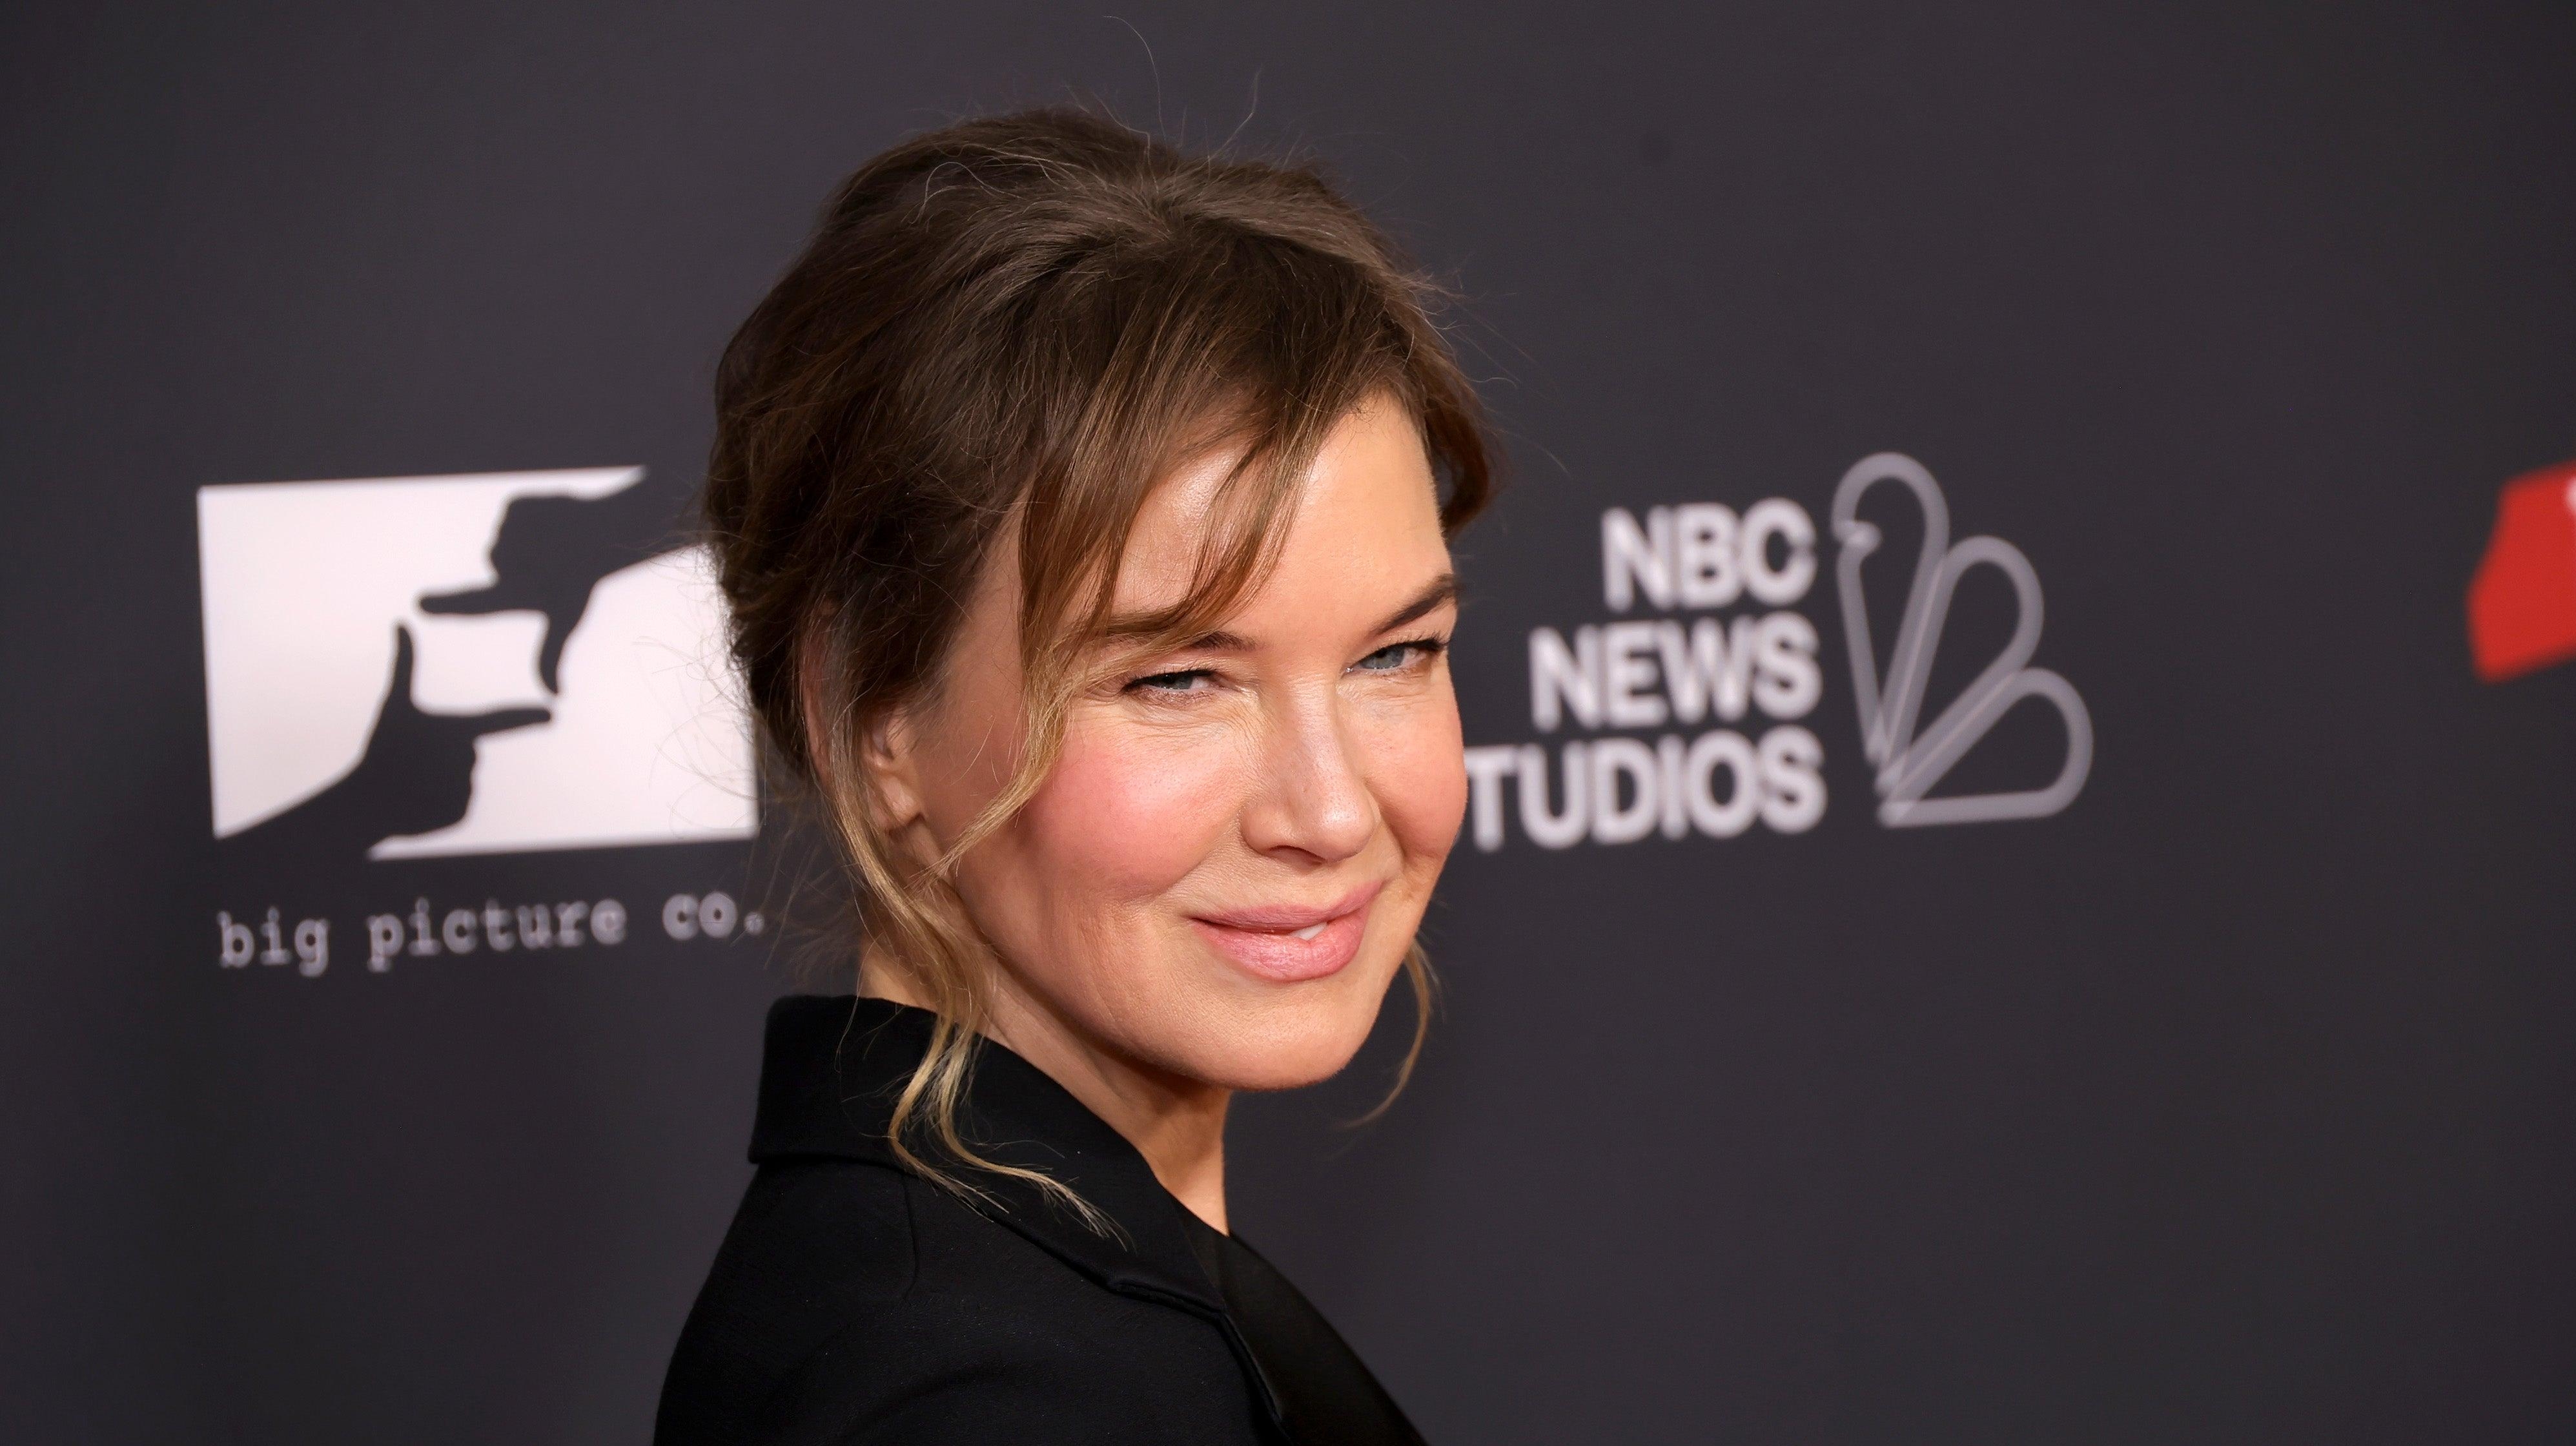 Renée Zellweger says she was told by film producers to drink alcohol before nude scenes